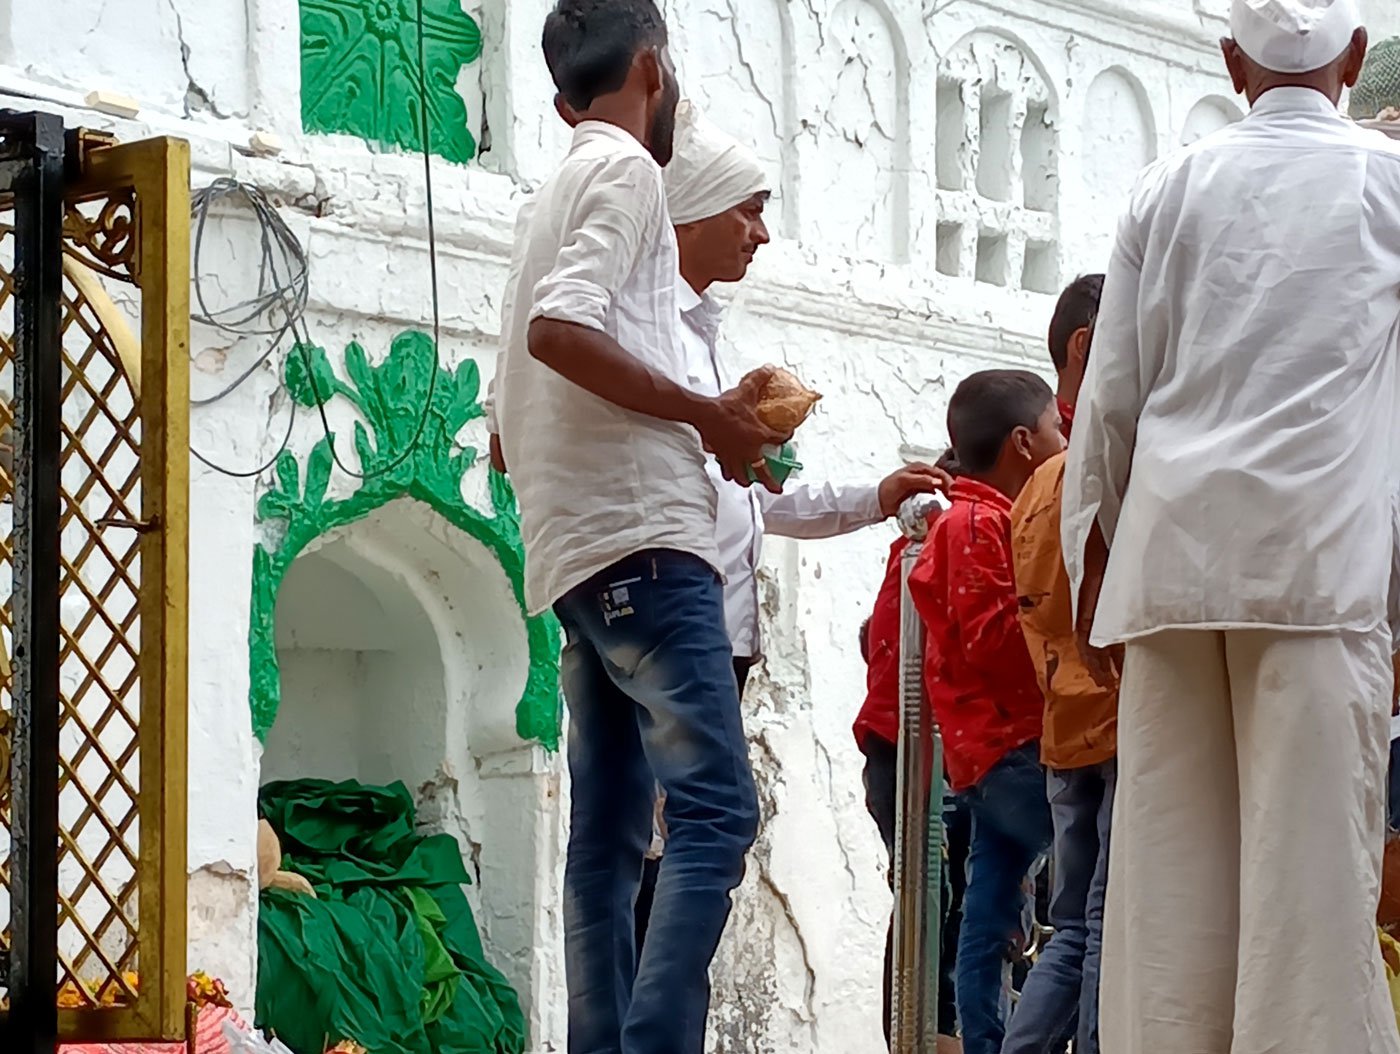 Invitation to Sufi shrine, Ajmer Sharif Dargah - Asslam Alikum and peace be  upon all mankind We invite all mankind of all faiths to participate in the  annual Urs of Hzrt Khwaja